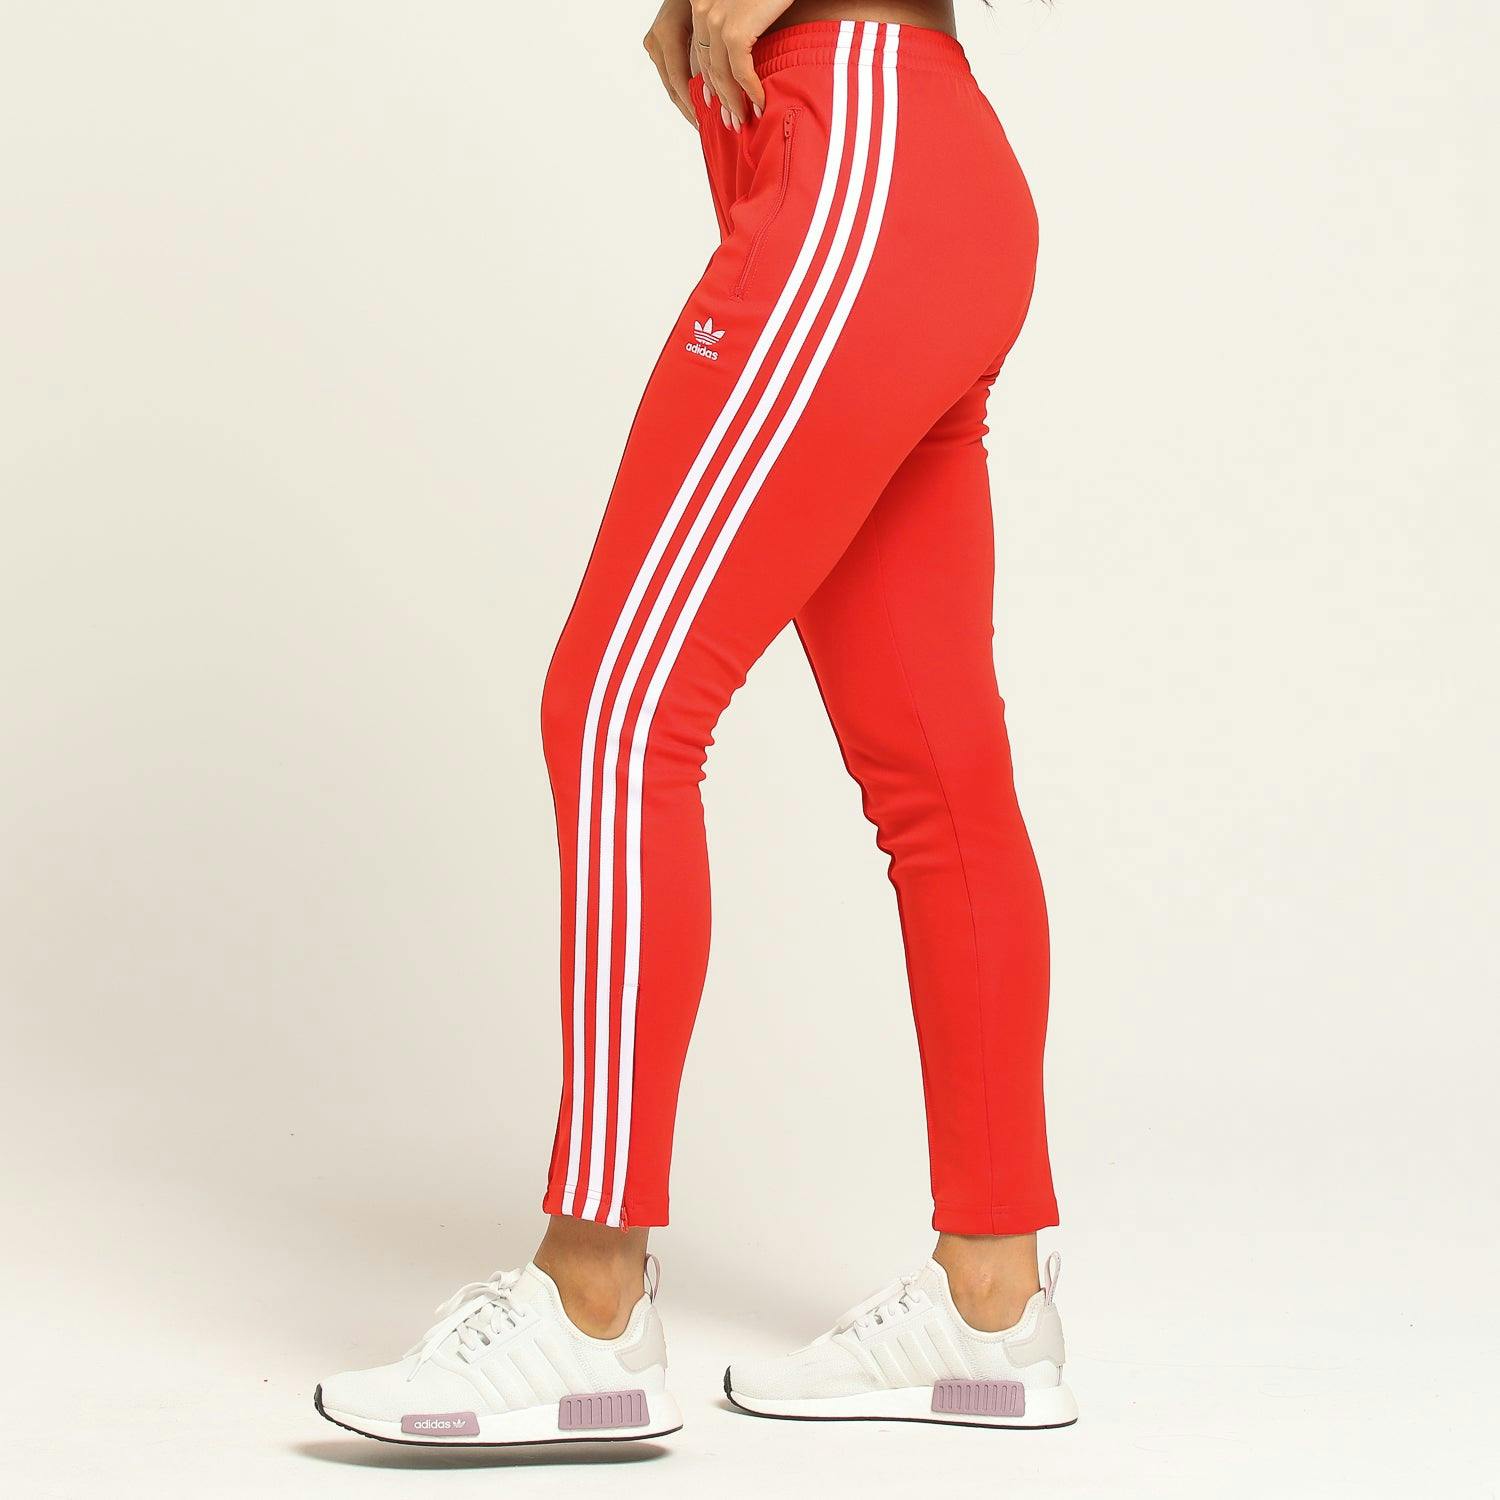 Adidas Women's Love Tracksuit Pants Red | Culture Kings NZ